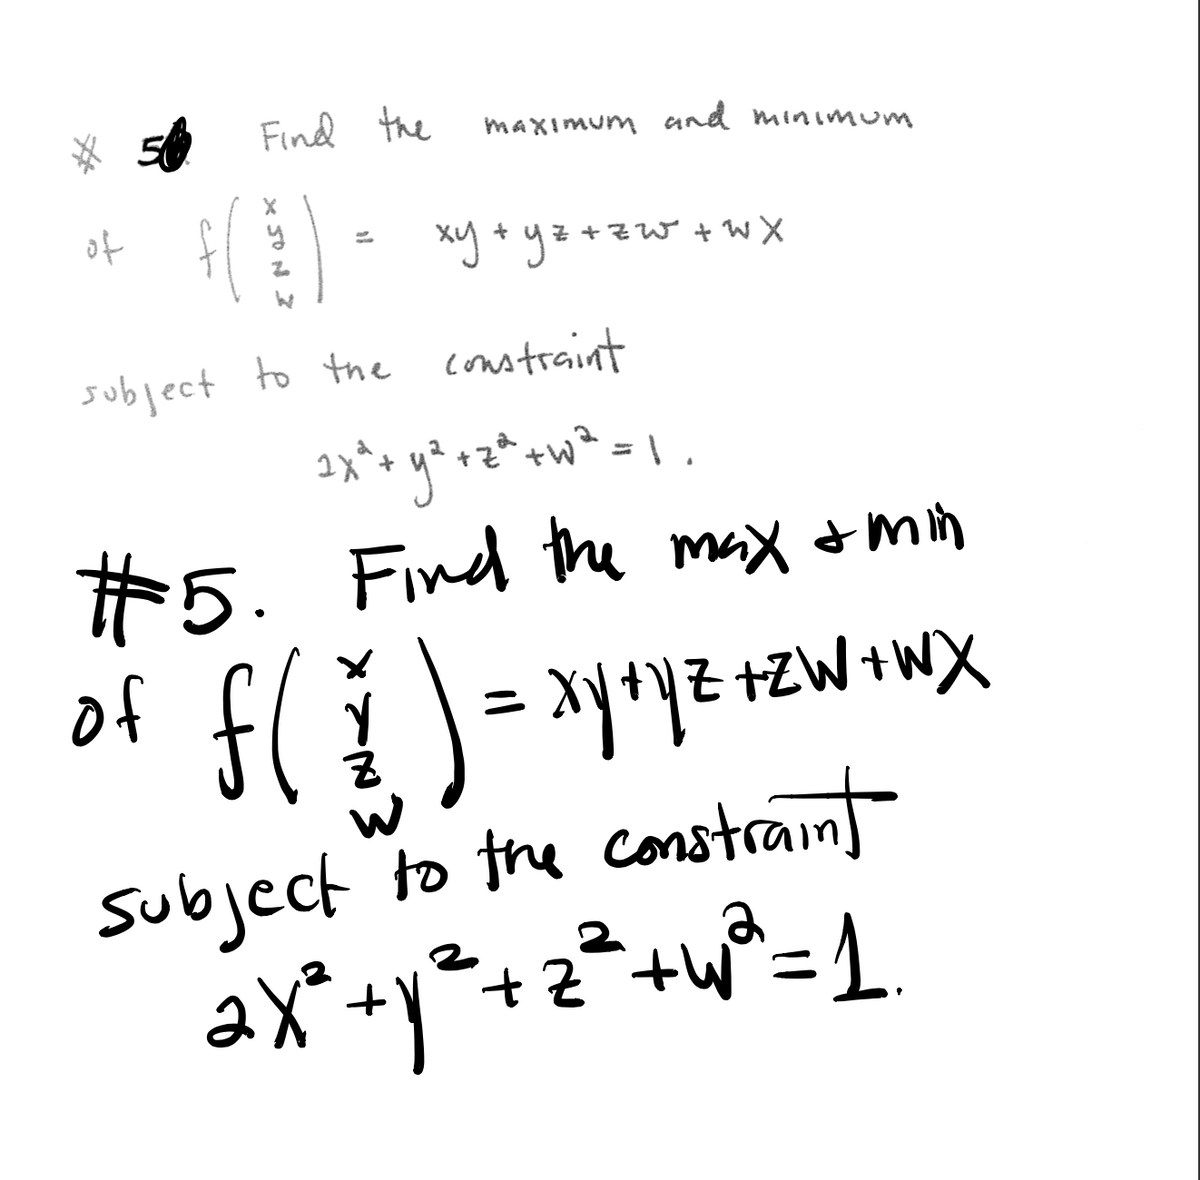 56 Find the
maximum and minimum
아
xy * yz+zw
subject to the constraint
%3D
#5. Find the max tmin
of
Xy+yZ +ZW+wX
subject to tre constrant
